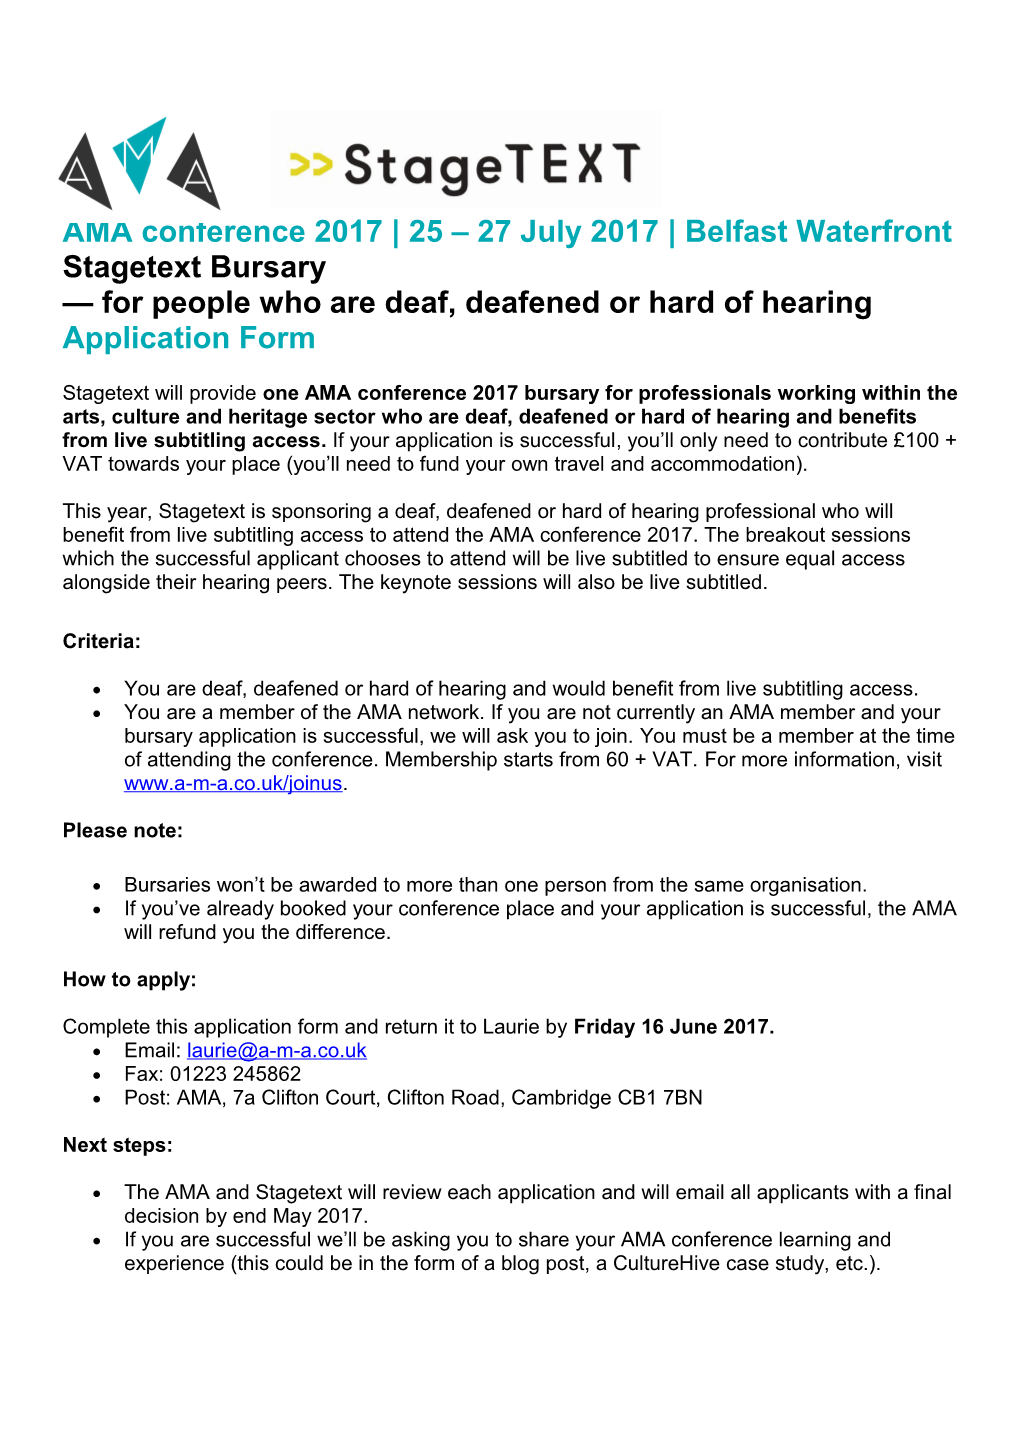 This Year, Stagetext Is Sponsoring a Deaf, Deafened Or Hard of Hearing Professional Who